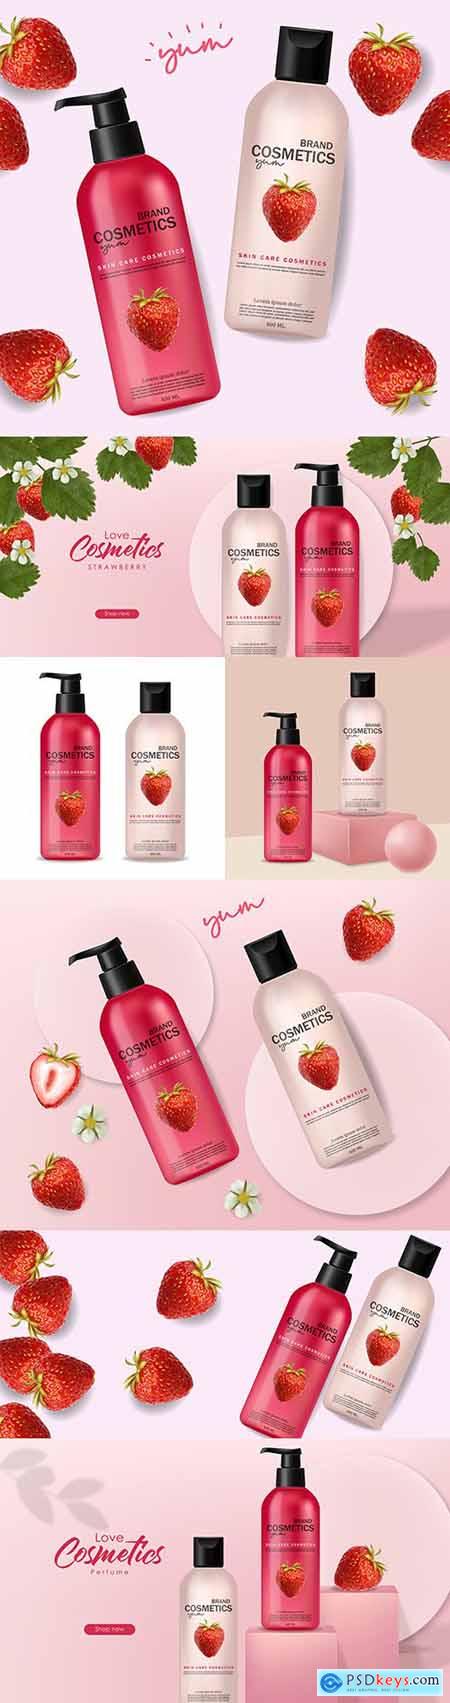 Fruit cosmetics for body care realistic illustrations 3